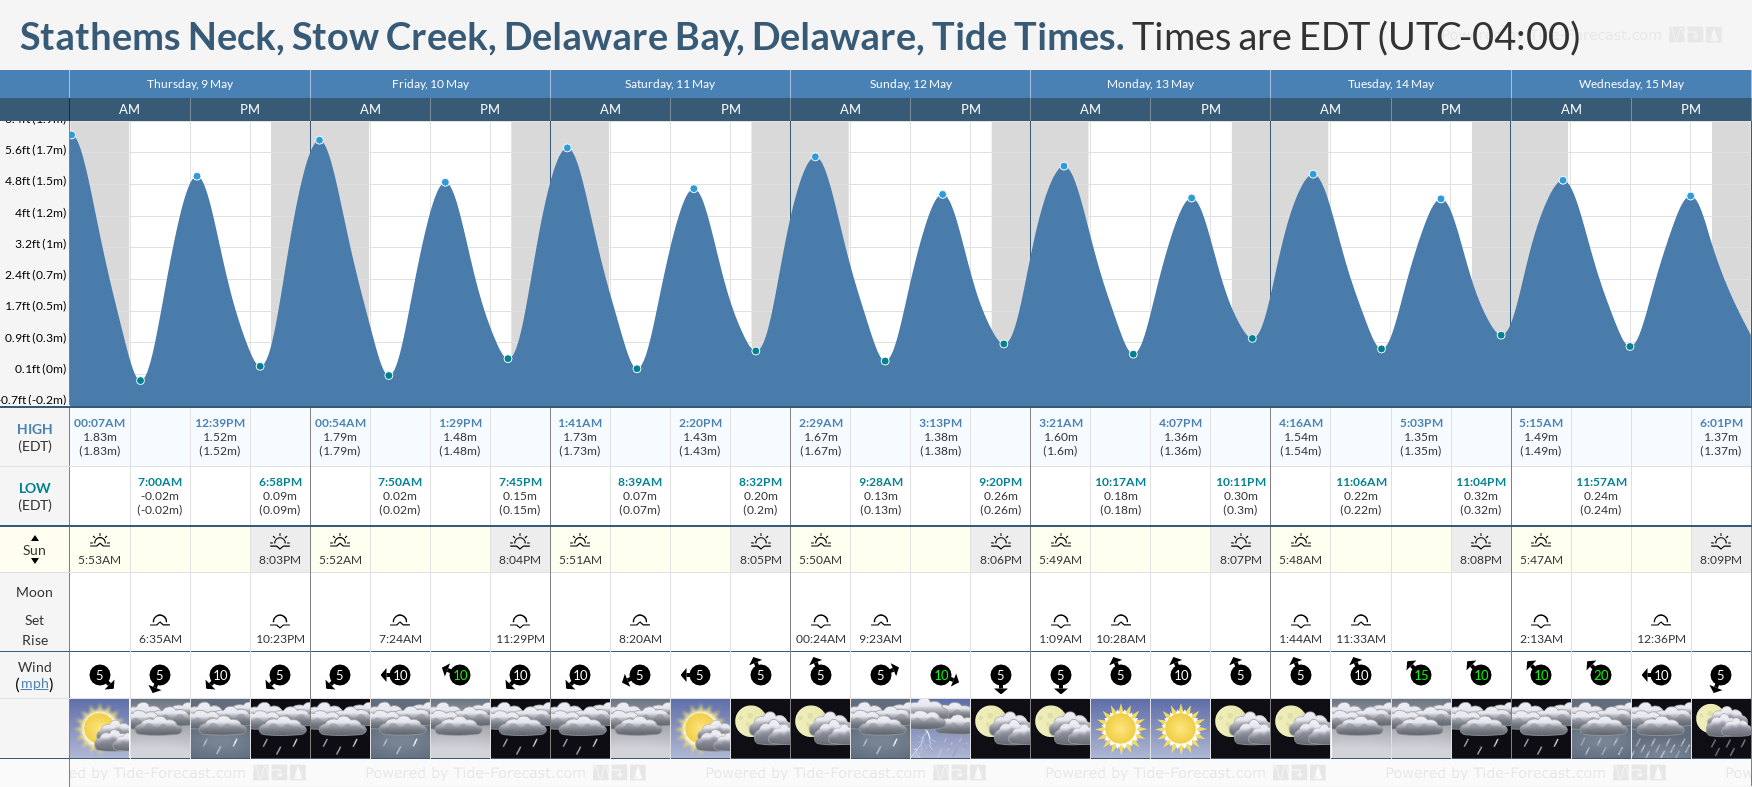 Stathems Neck, Stow Creek, Delaware Bay, Delaware Tide Chart including high and low tide tide times for the next 7 days